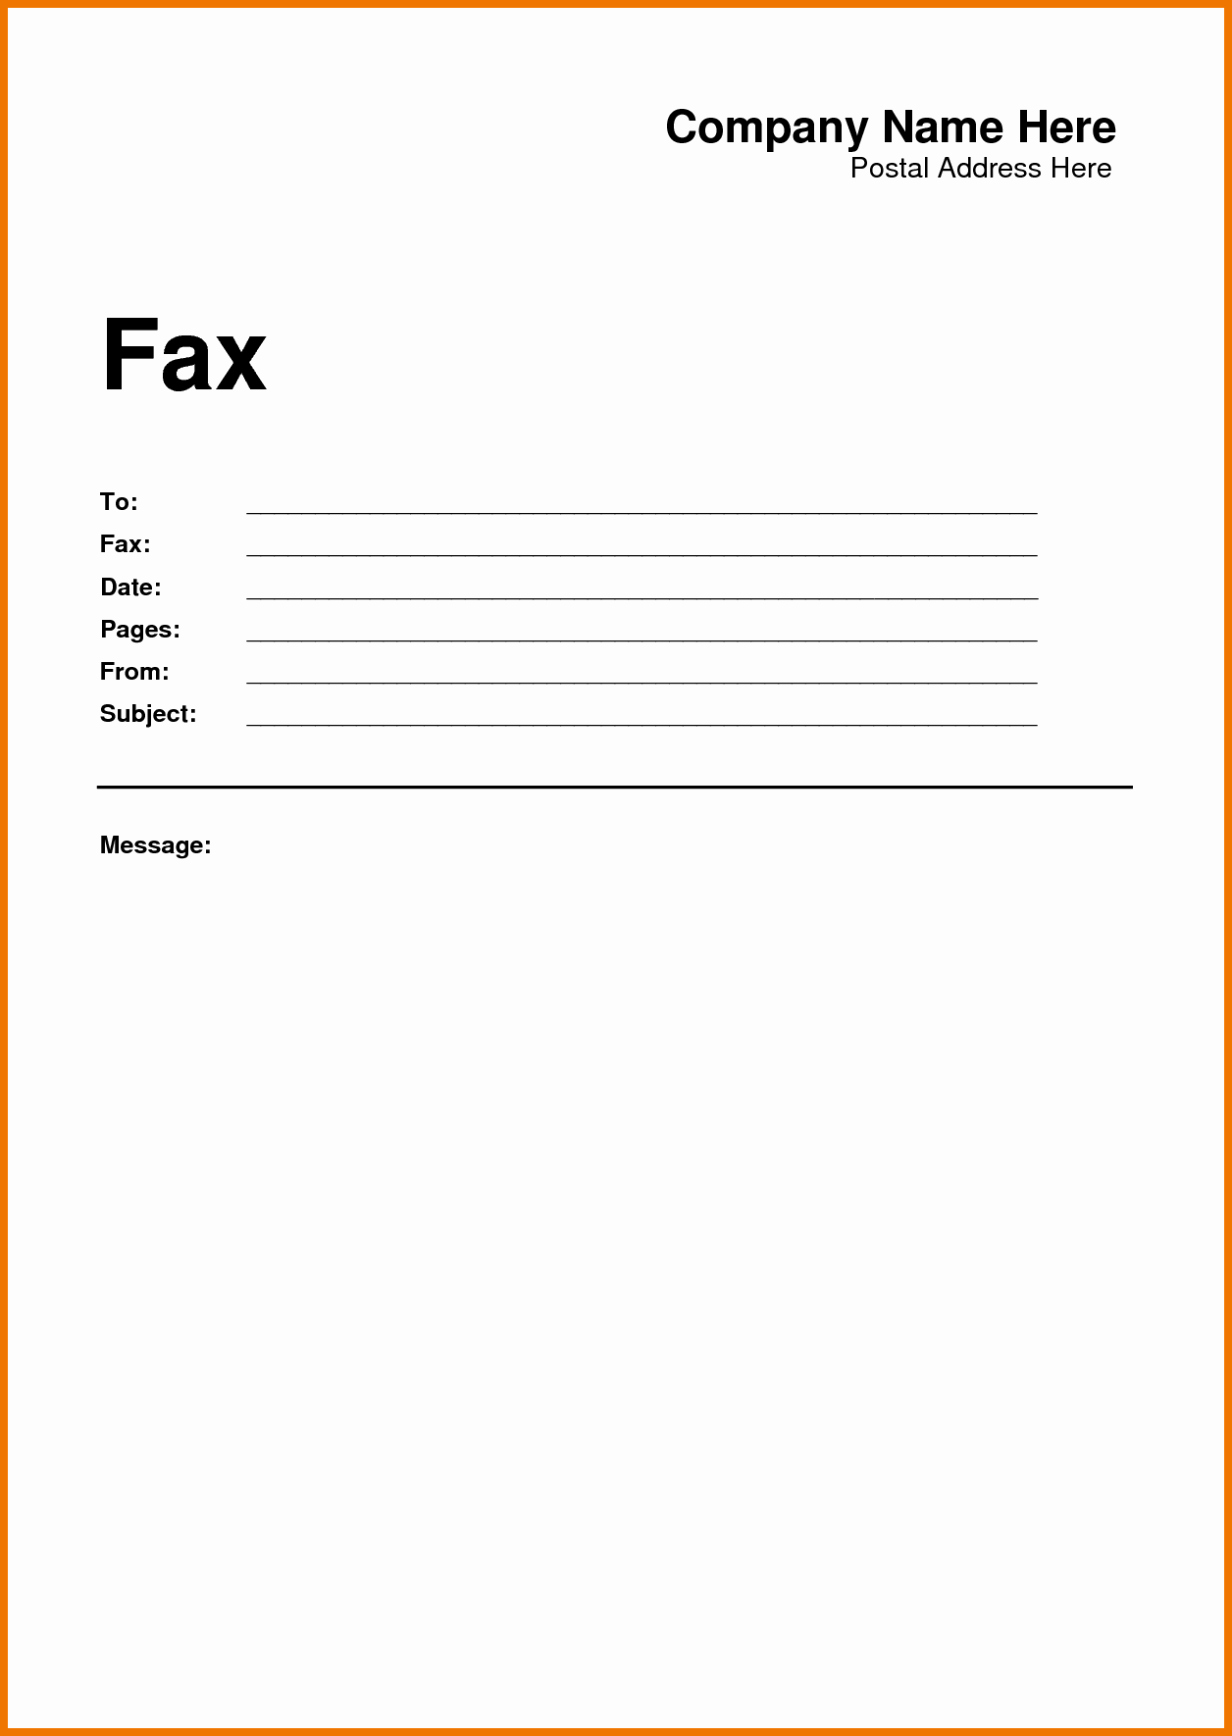 s fax cover sheets